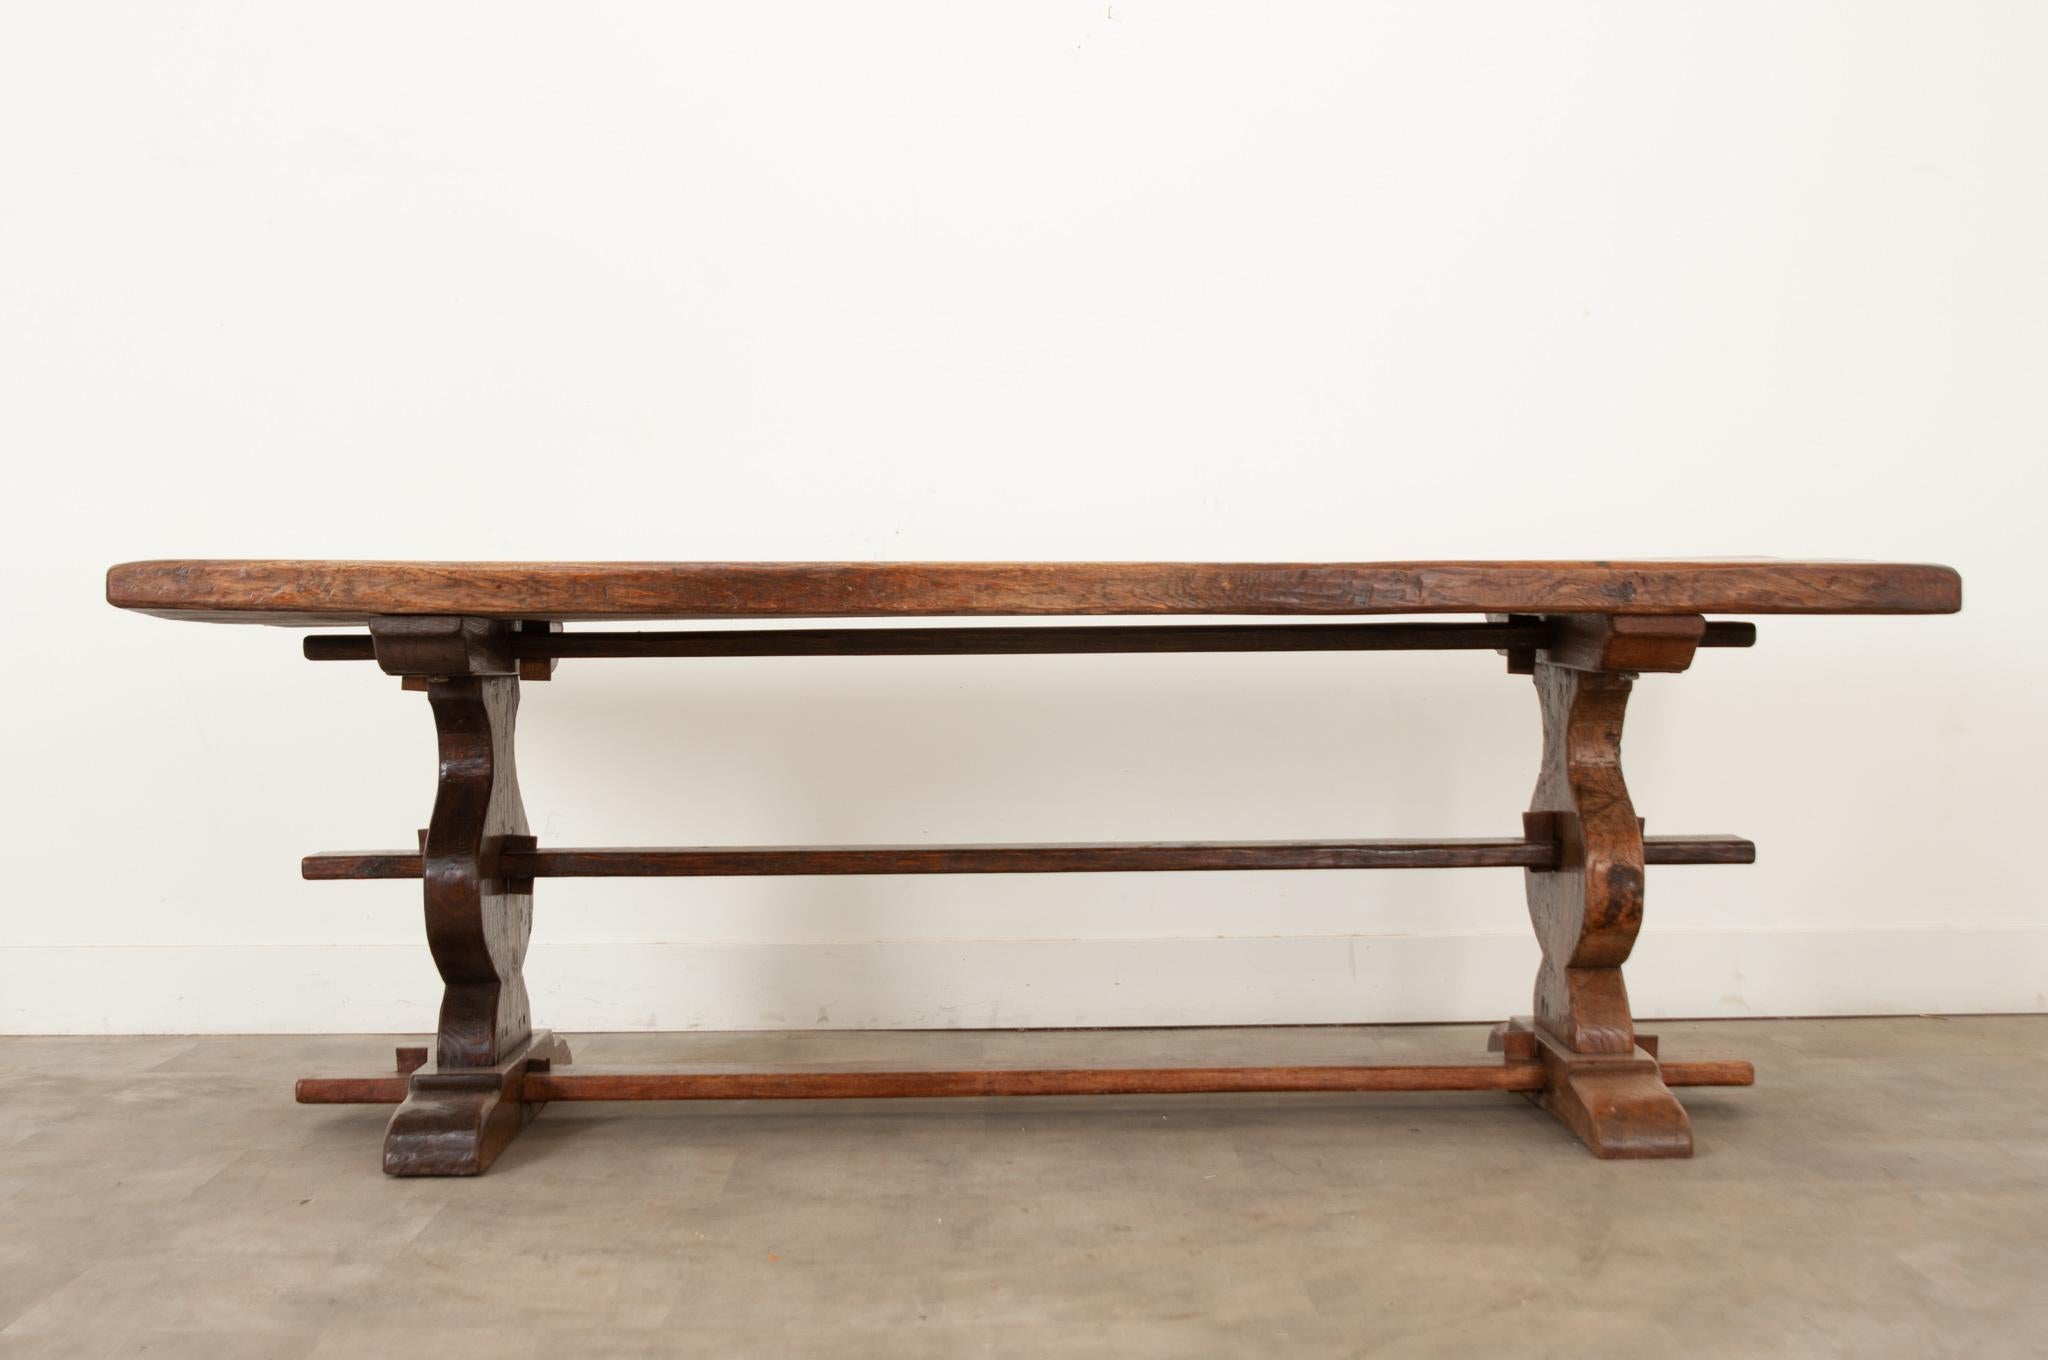 A handsome French trestle base table is made using hand cut solid oak boards. The two inch thick top sits over a pair of hourglass shaped pedestals connecting with three stretchers. This table has been recently polished with a French paste wax and